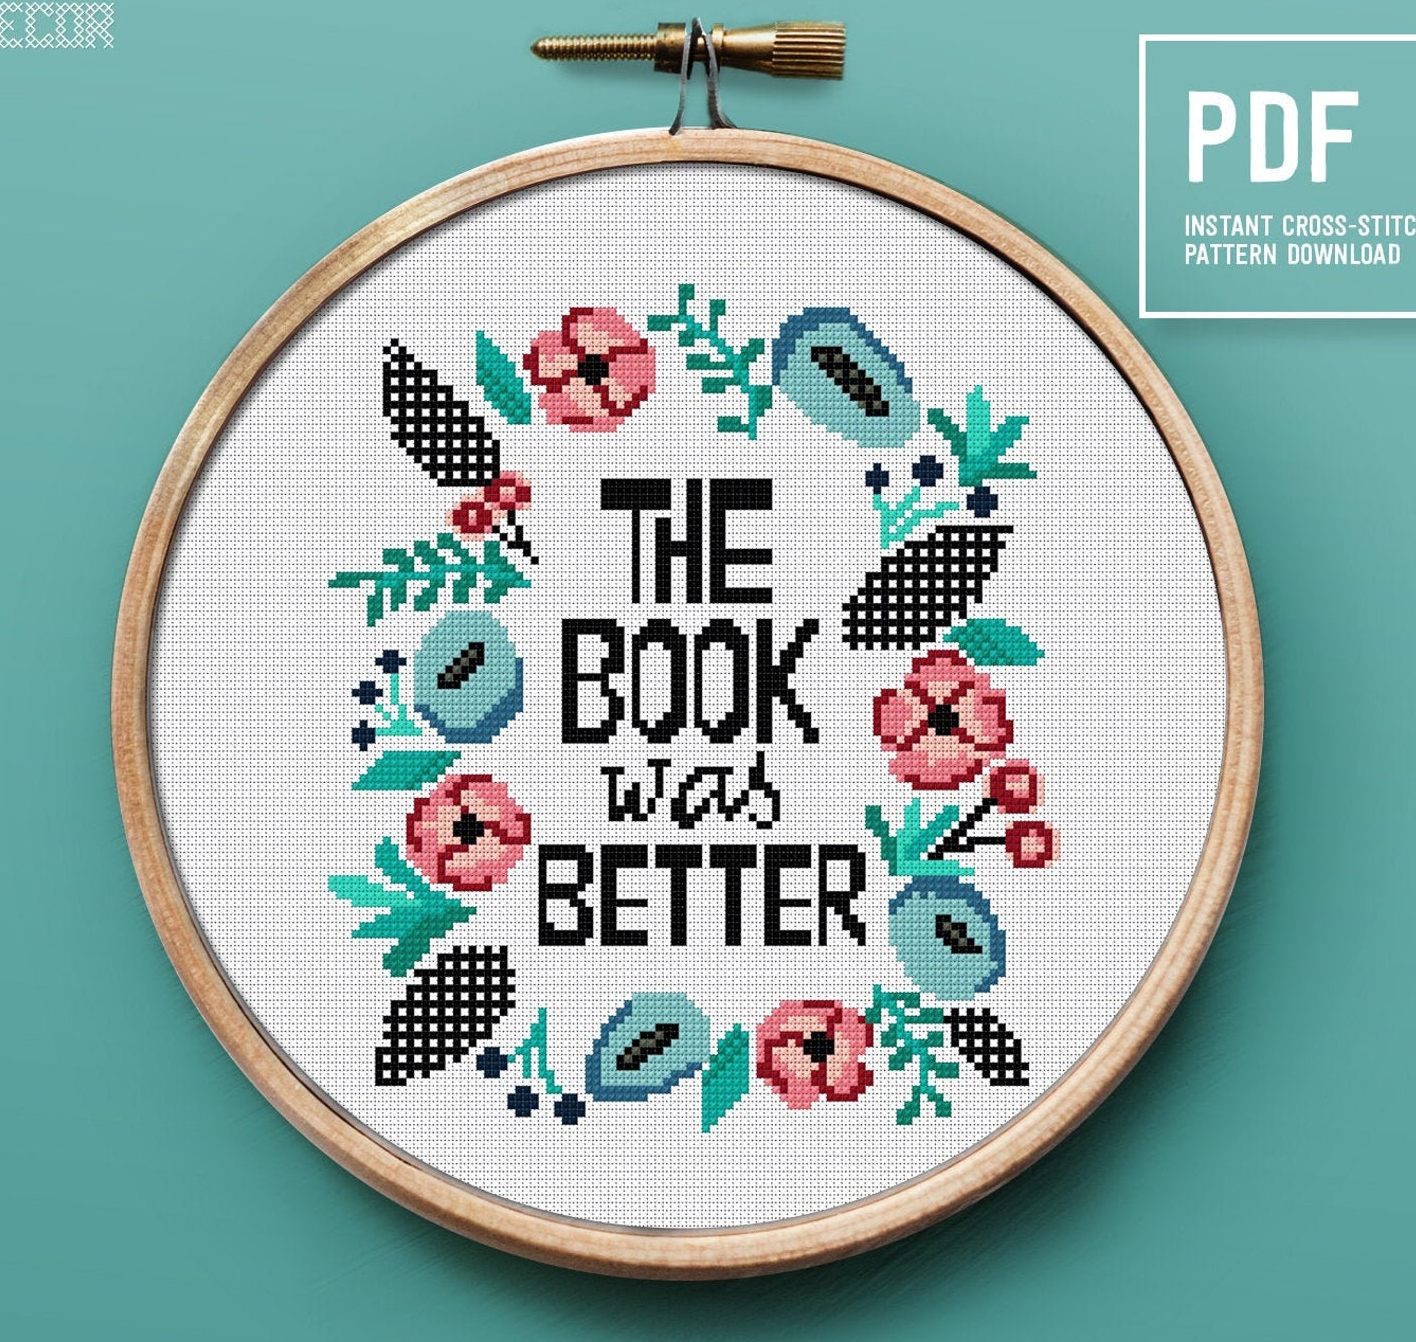 More Awesome Literary Embroidery, blog post by Aspasia S. Bissas, needlepoint, embroidery, cross-stitch, cross stitch, crossstitch, patterns, free patterns, books, reading, bookish, literary, aspasiasbissas.com, the book was better, etsy, pattern download